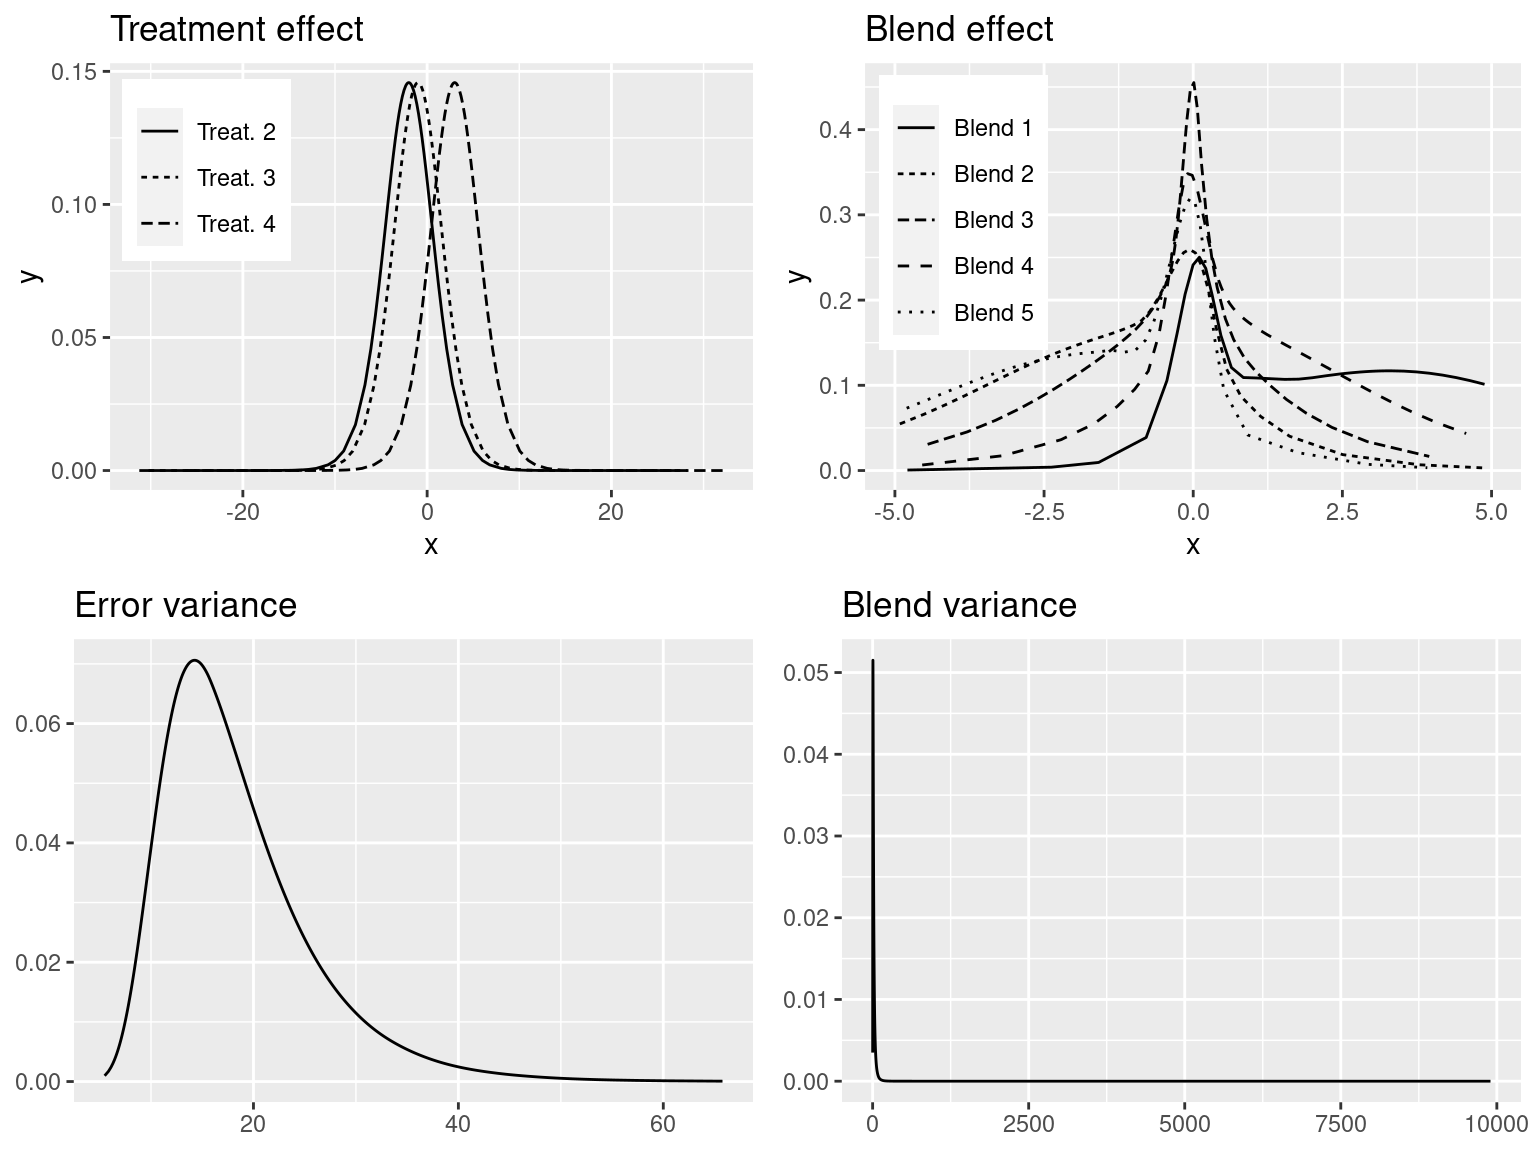 Marginals of fixed effects of the production method (top-left), blend random-effects (top-right), variance of the error term (bottom-left) and variance of the blend effect (bottom-right).